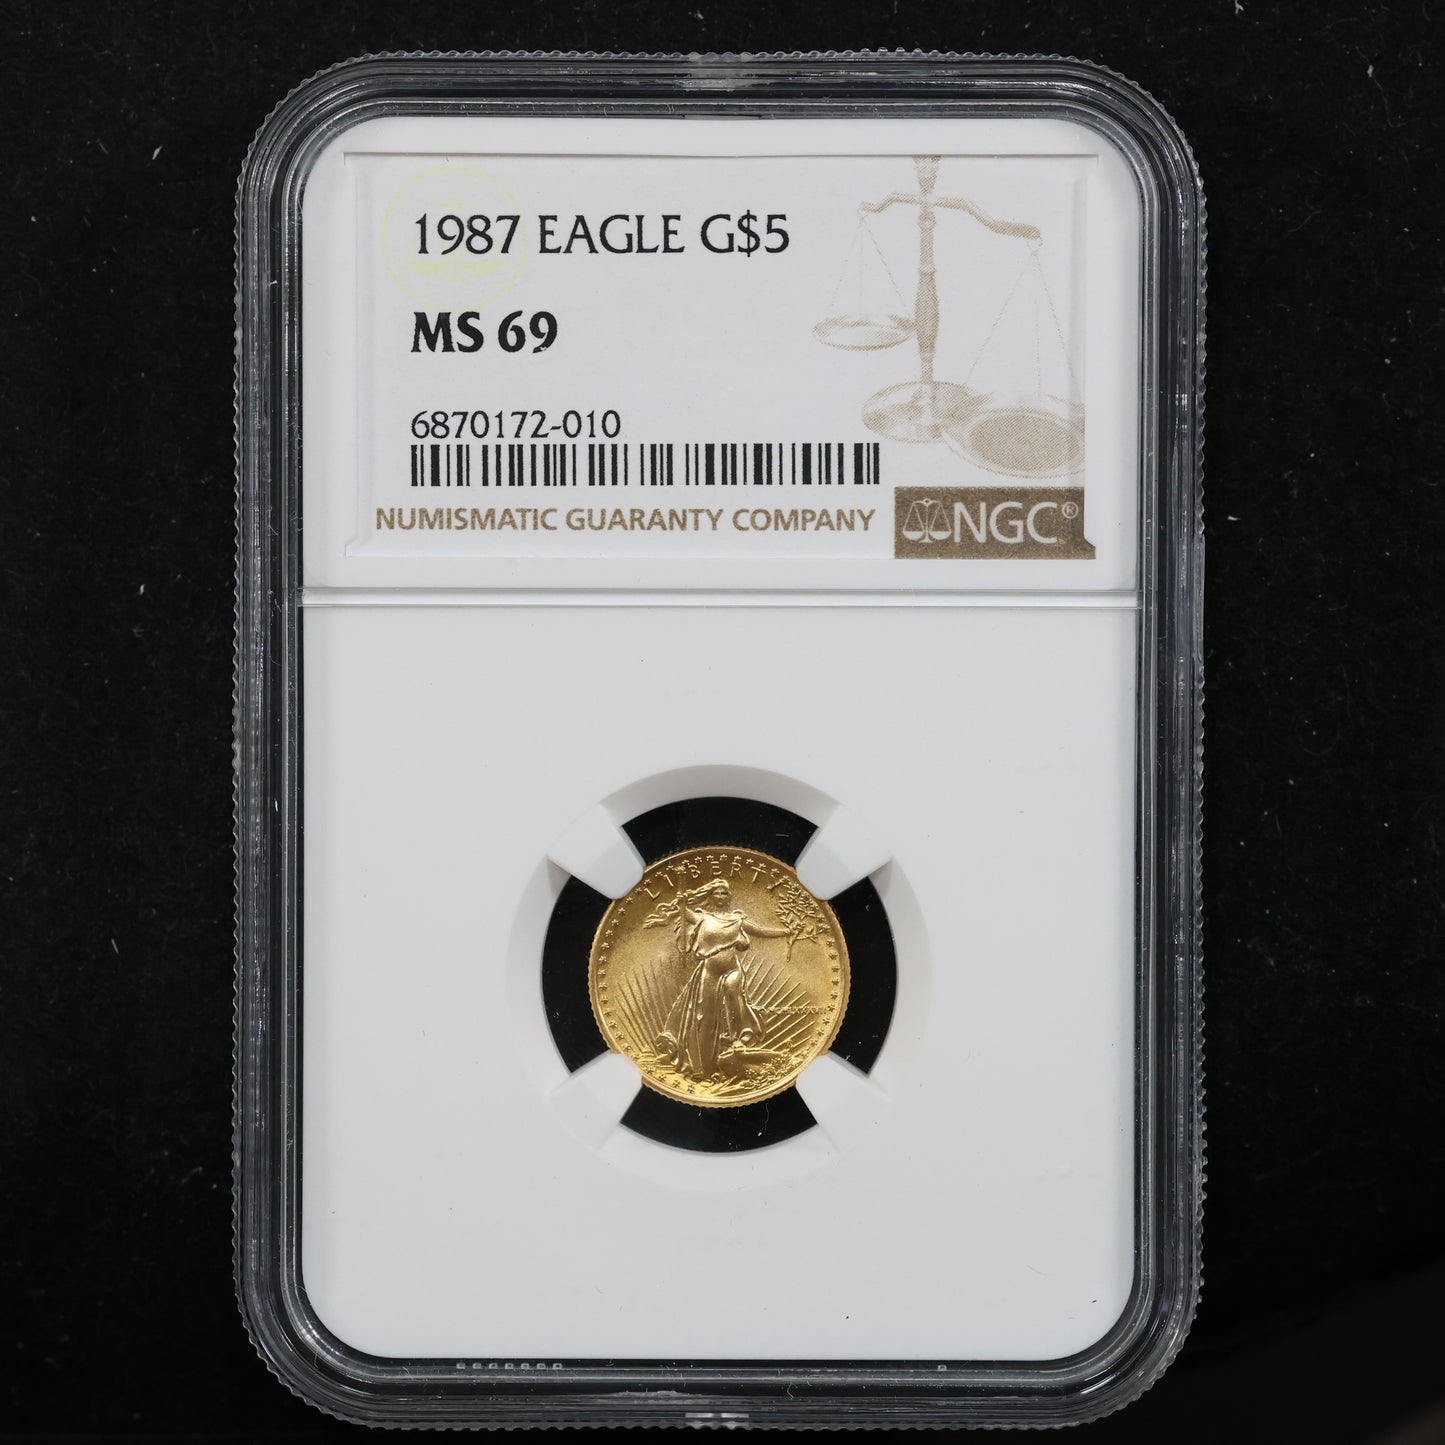 1987 1/10 oz Gold American Eagle 5$ Bullion Gold Coin - NGC MS 69